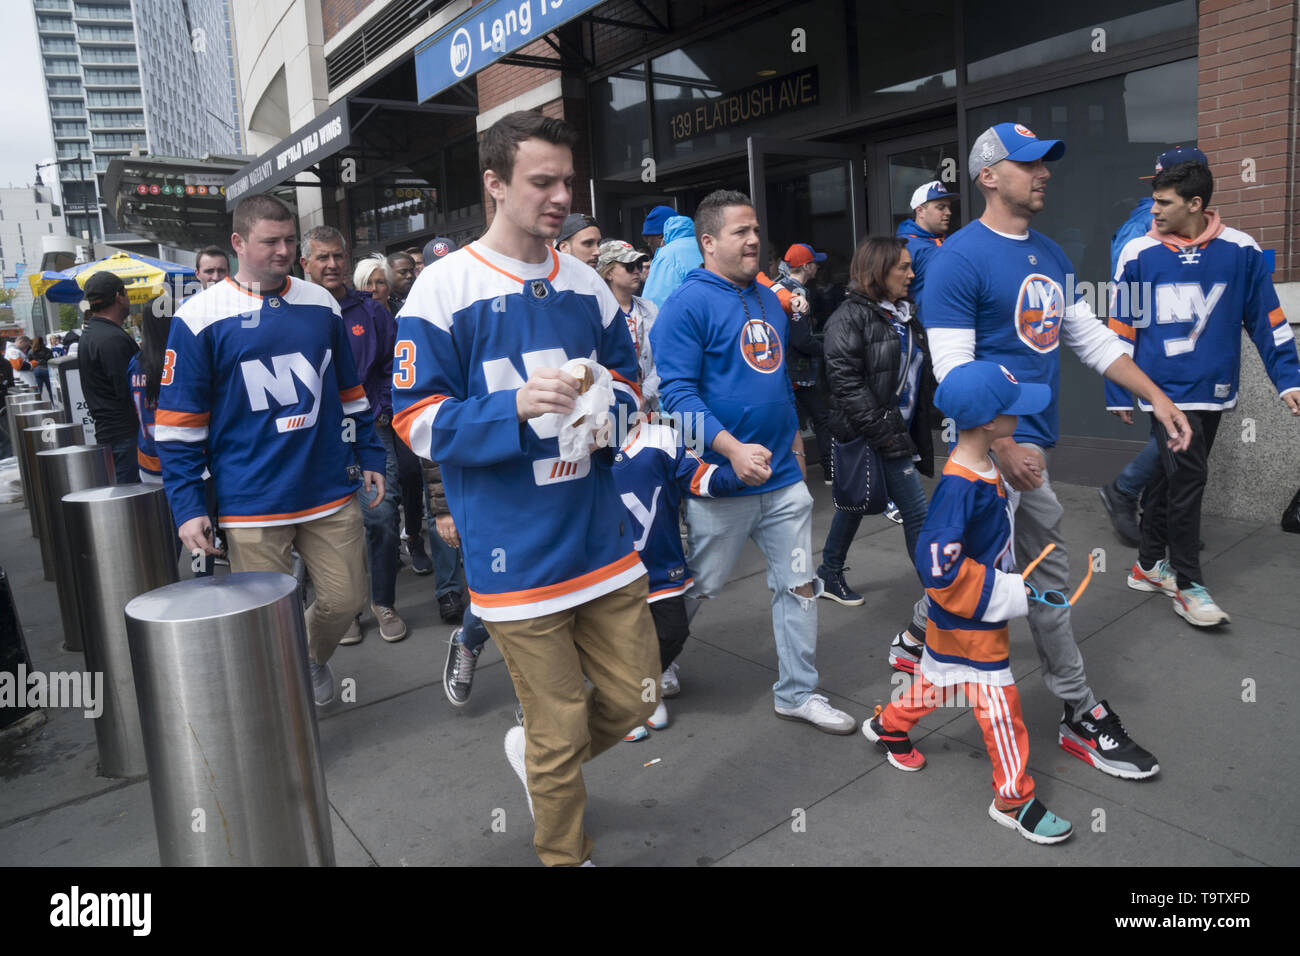 New York Rangers Fans High Resolution Stock Photography and Images - Alamy